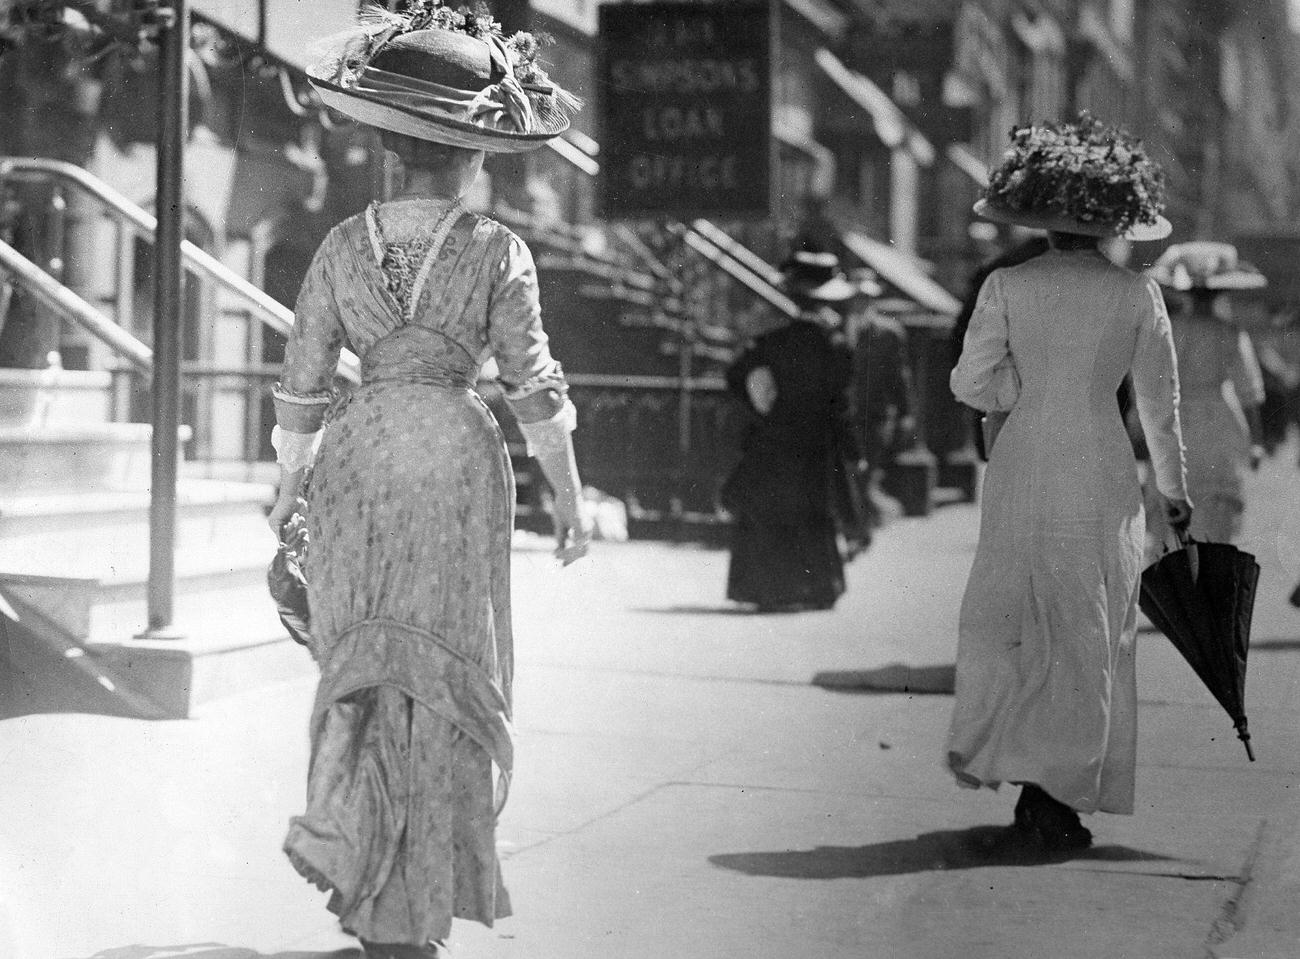 Two Women In Dresses In New York, On 42Nd Street, Summer 1907